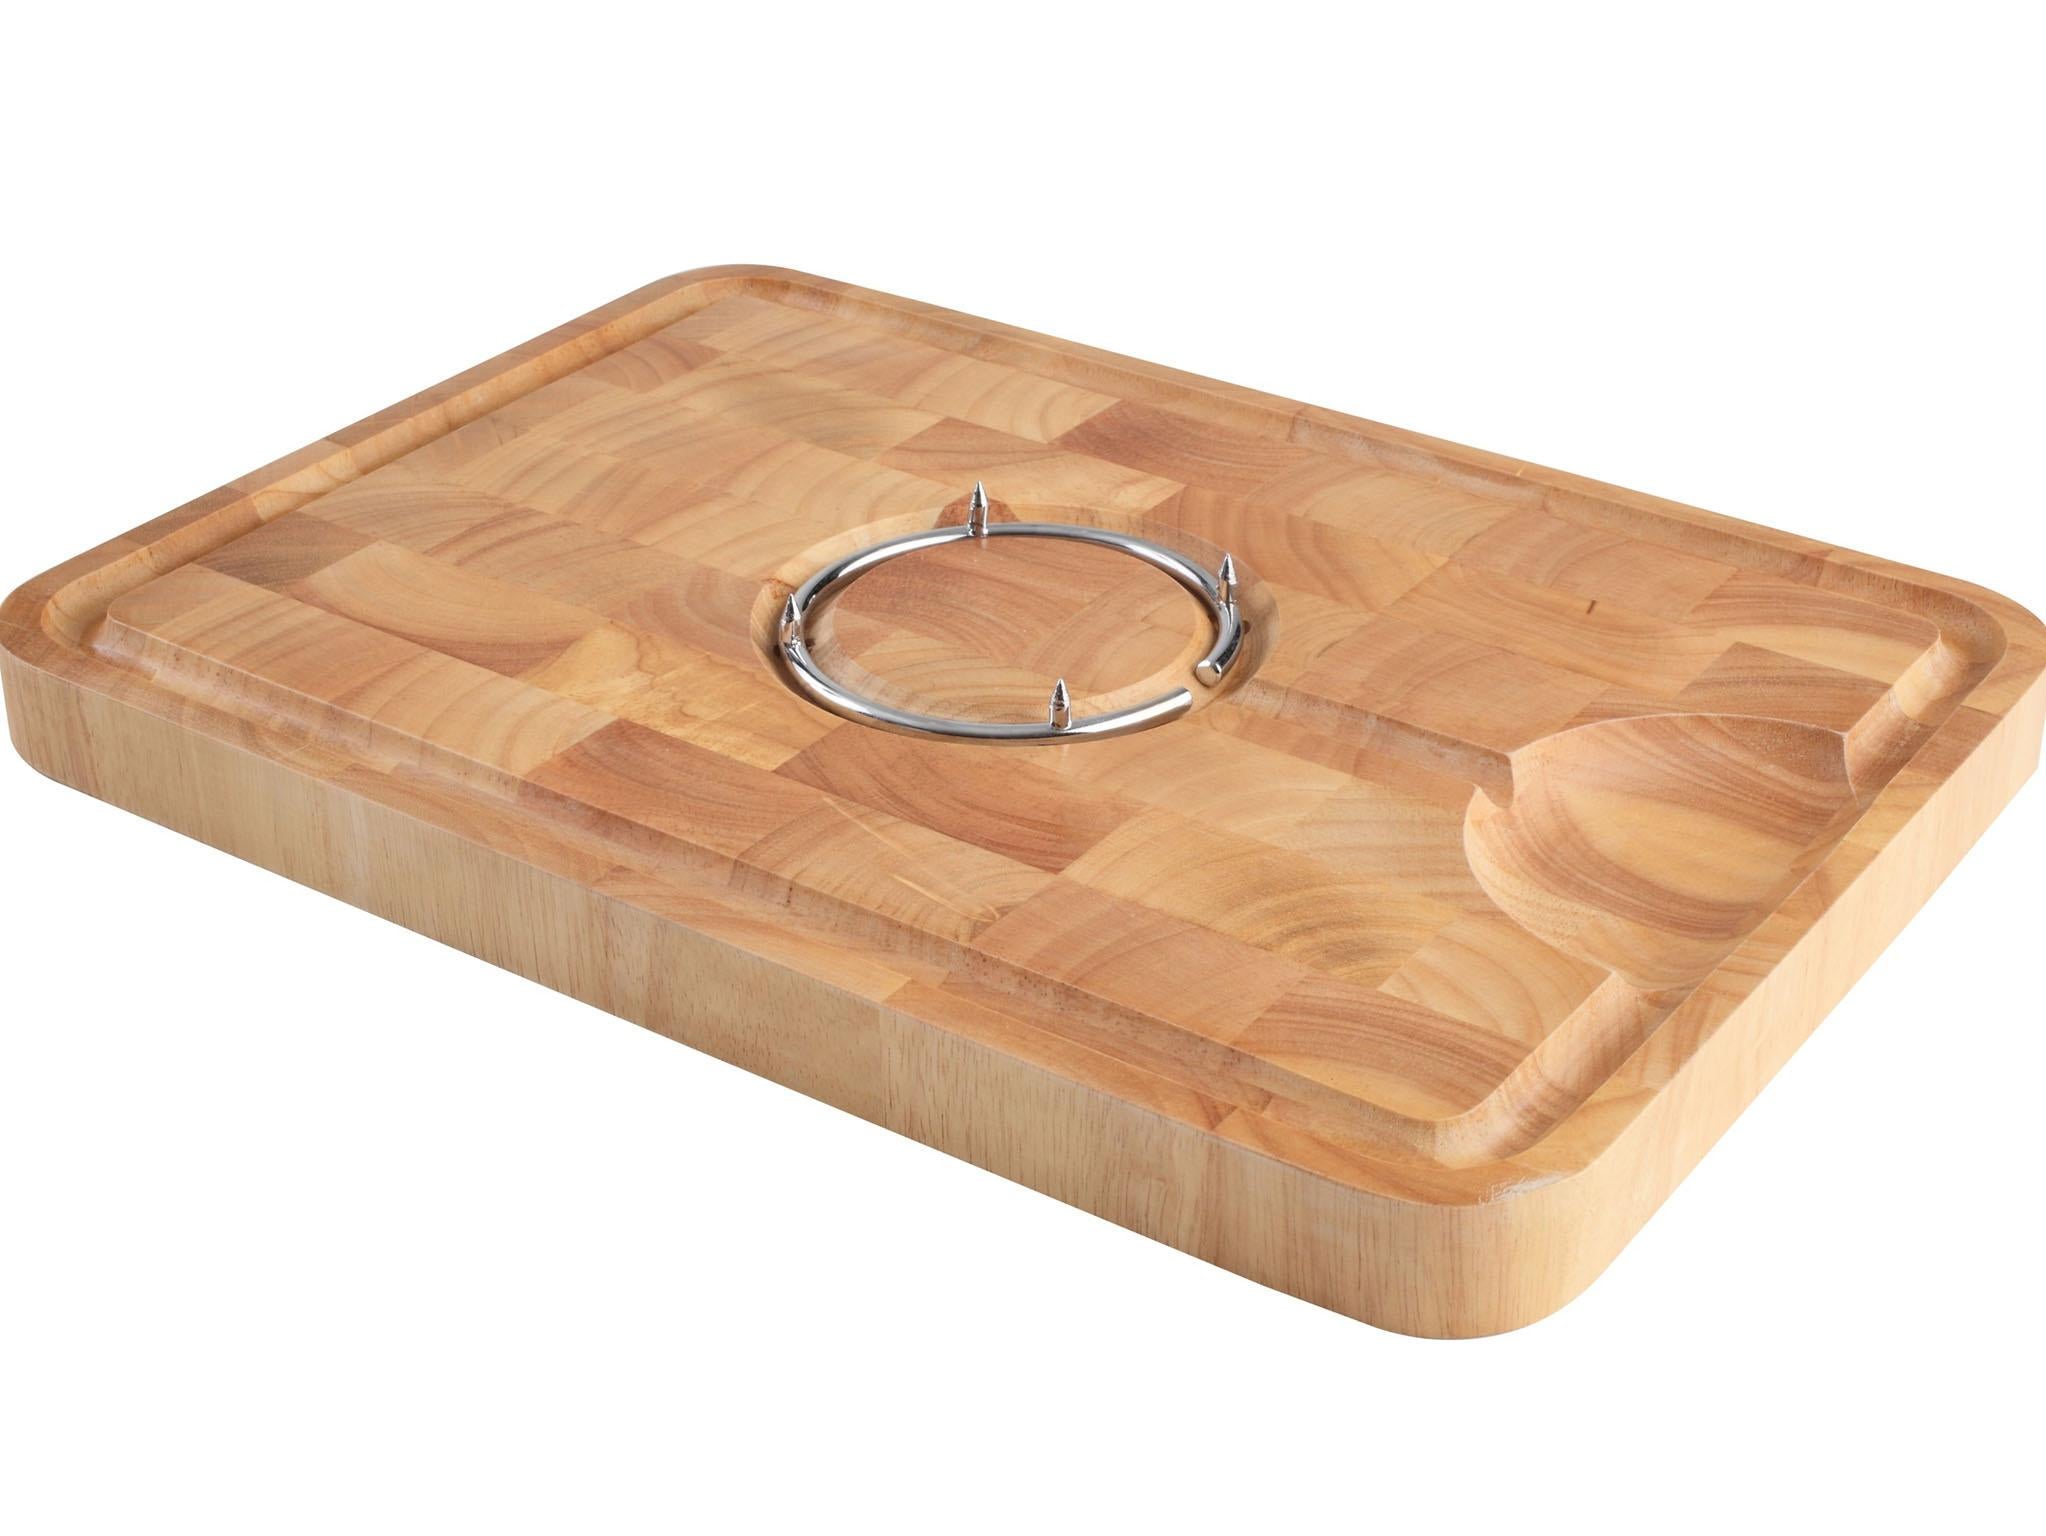 Carving board with removable spiked metal ring, £34.95, steamer.co.uk